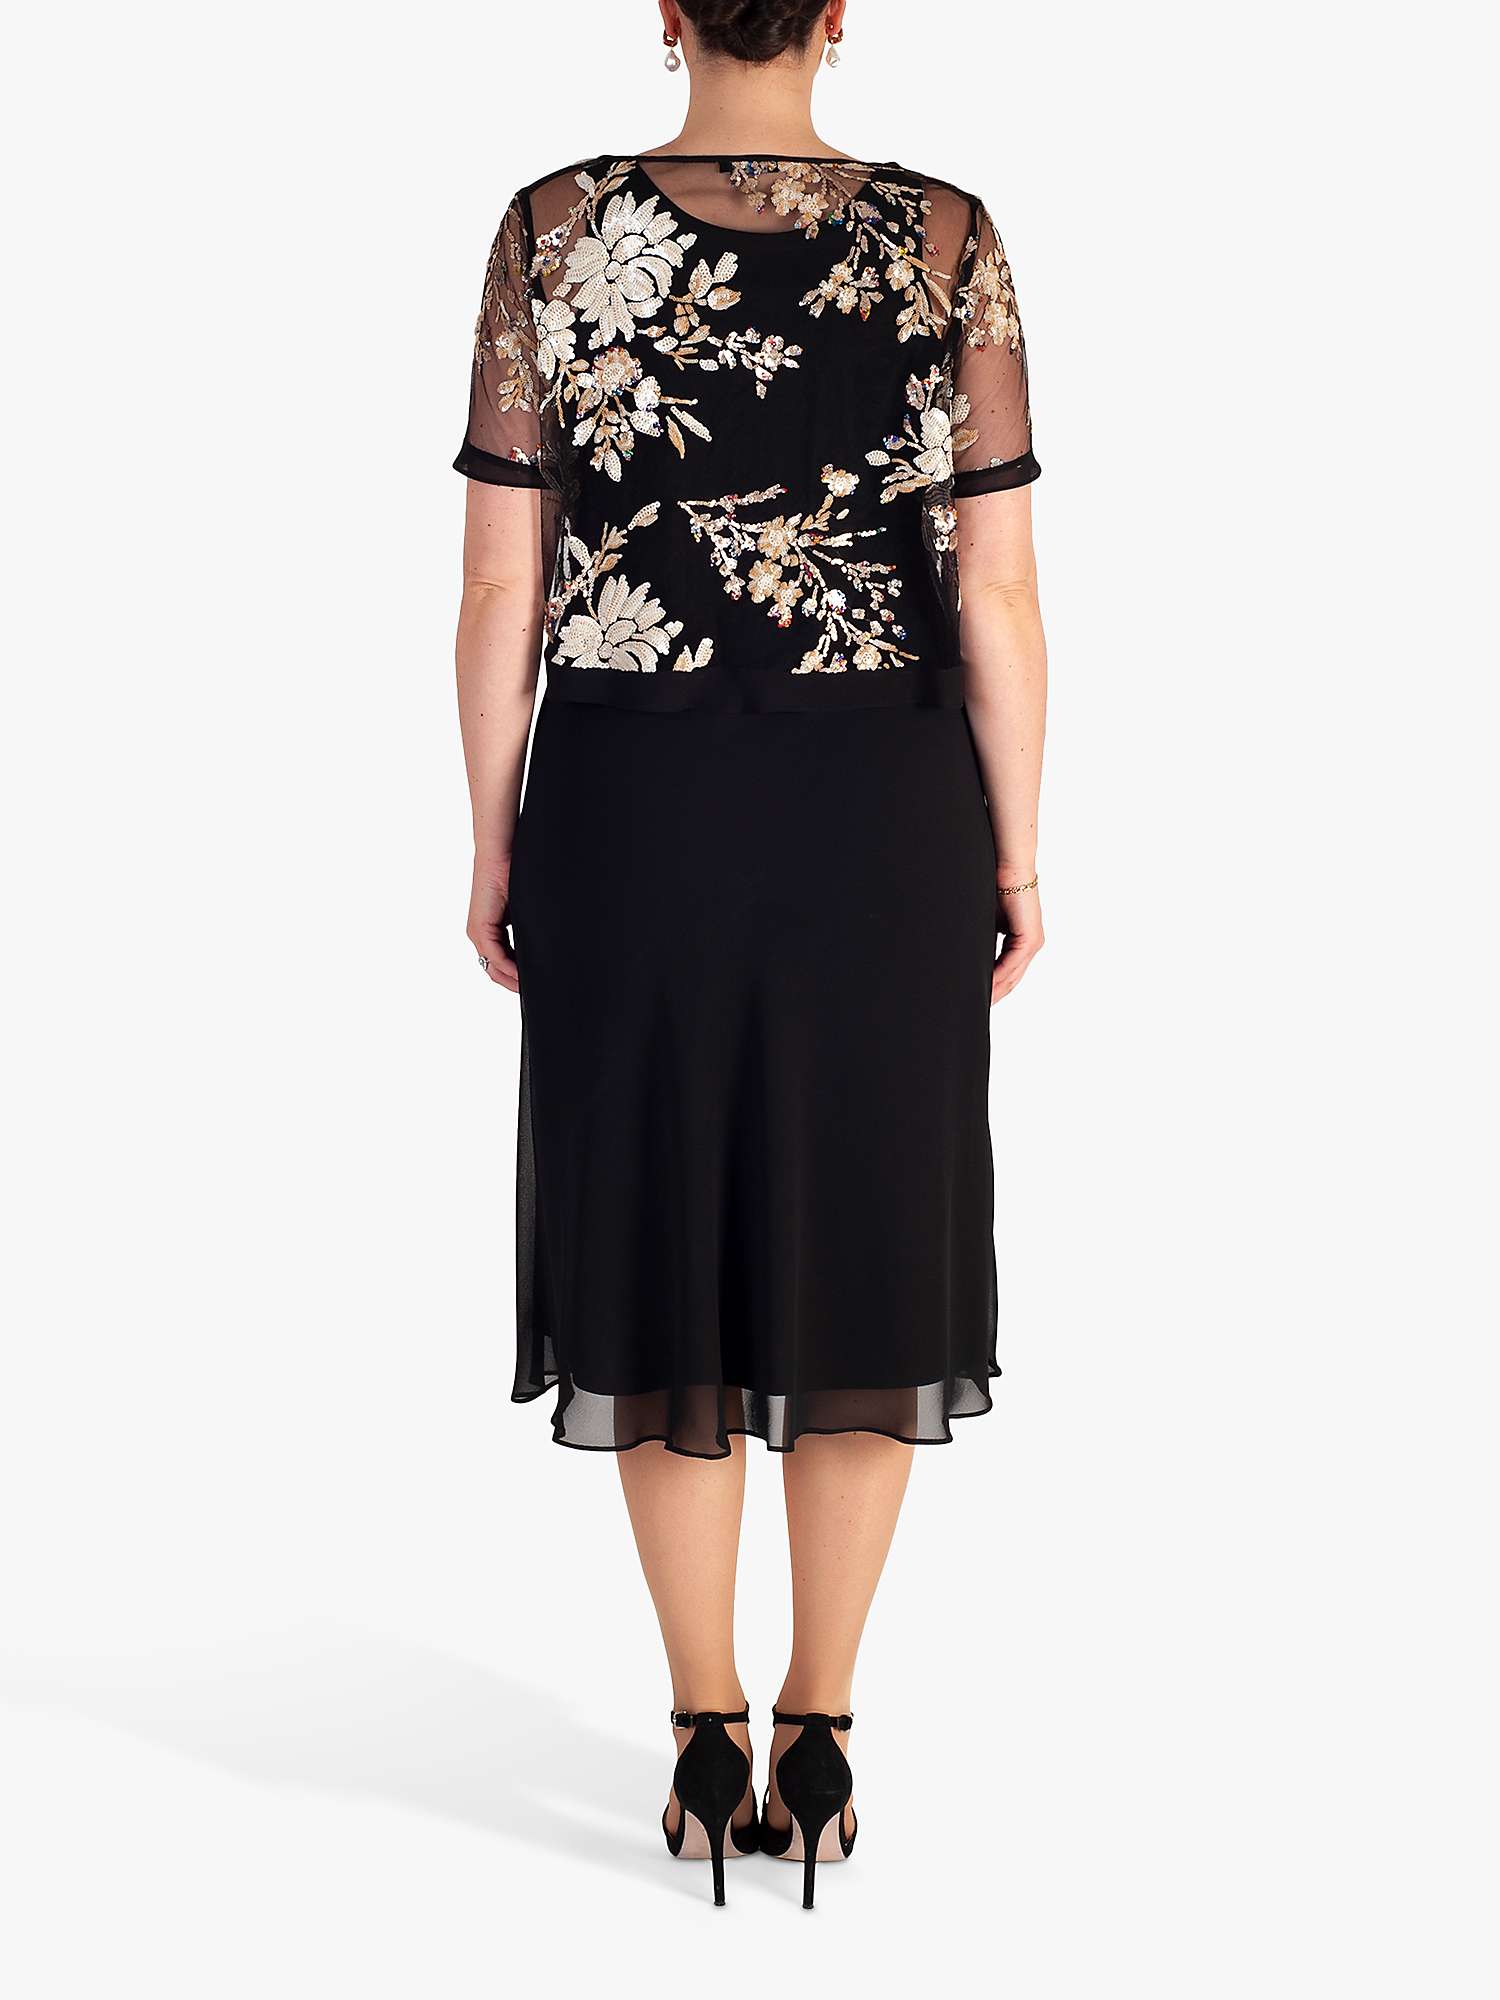 Buy chesca Embroidered Sequin Dress, Black/Gold Online at johnlewis.com